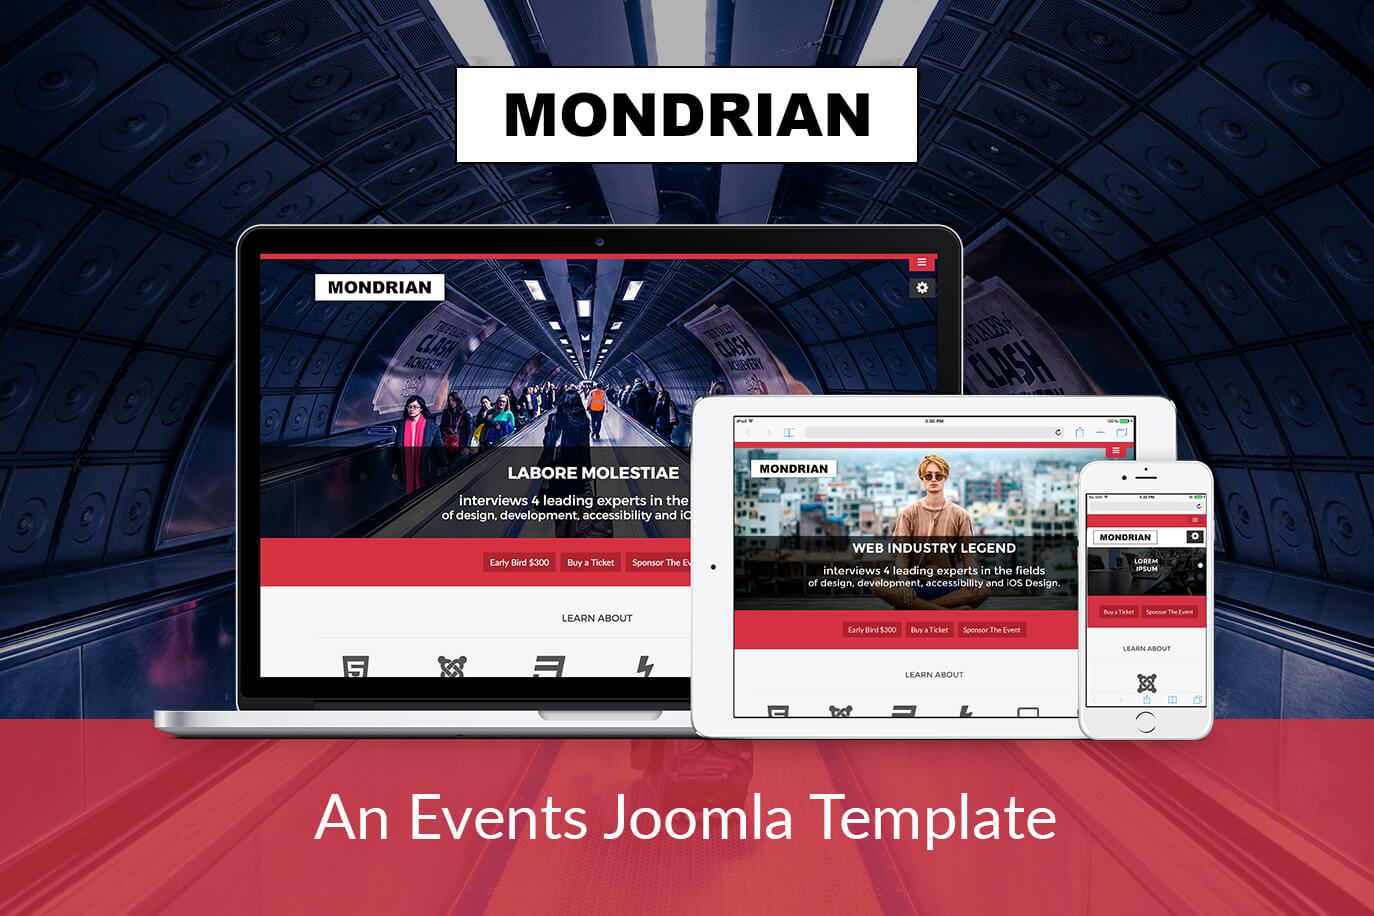 A landing page and events Joomla template - Mondrian